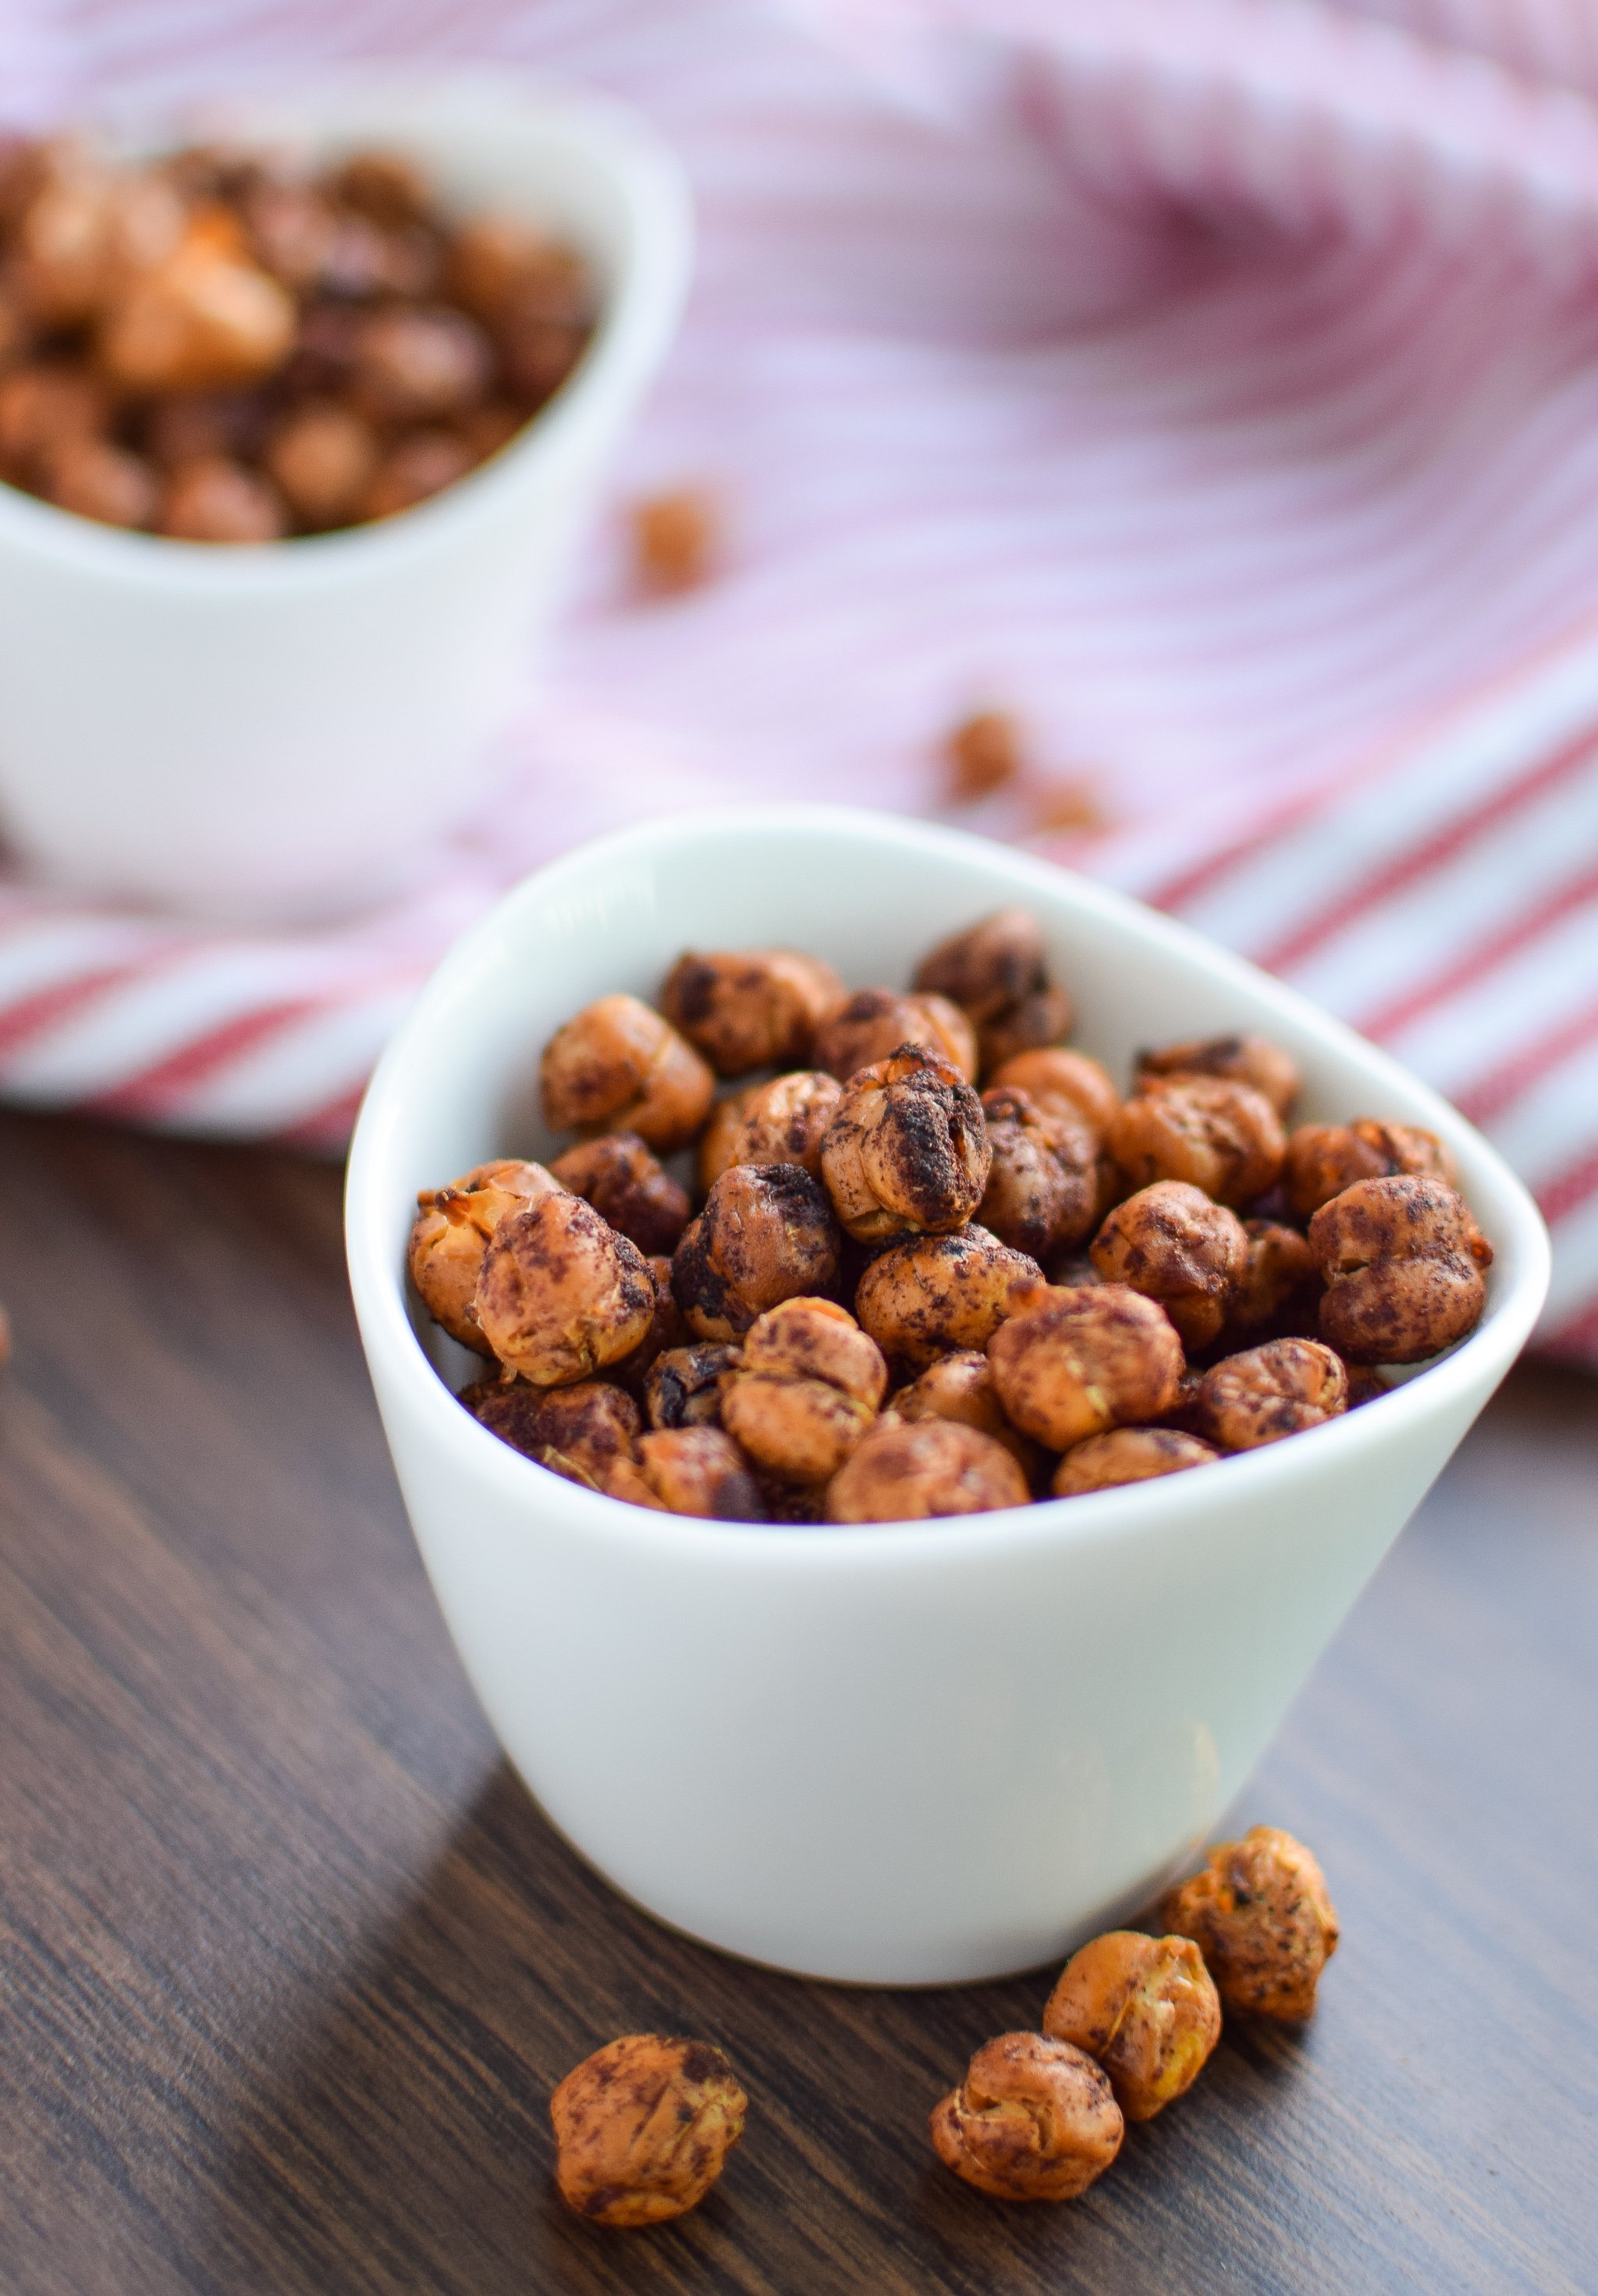 Crispy Cinnamon Roasted Chickpeas - A healthy crunchy holiday treat! Four simple ingredients and your home smells amazing! - ProjectMealPlan.com